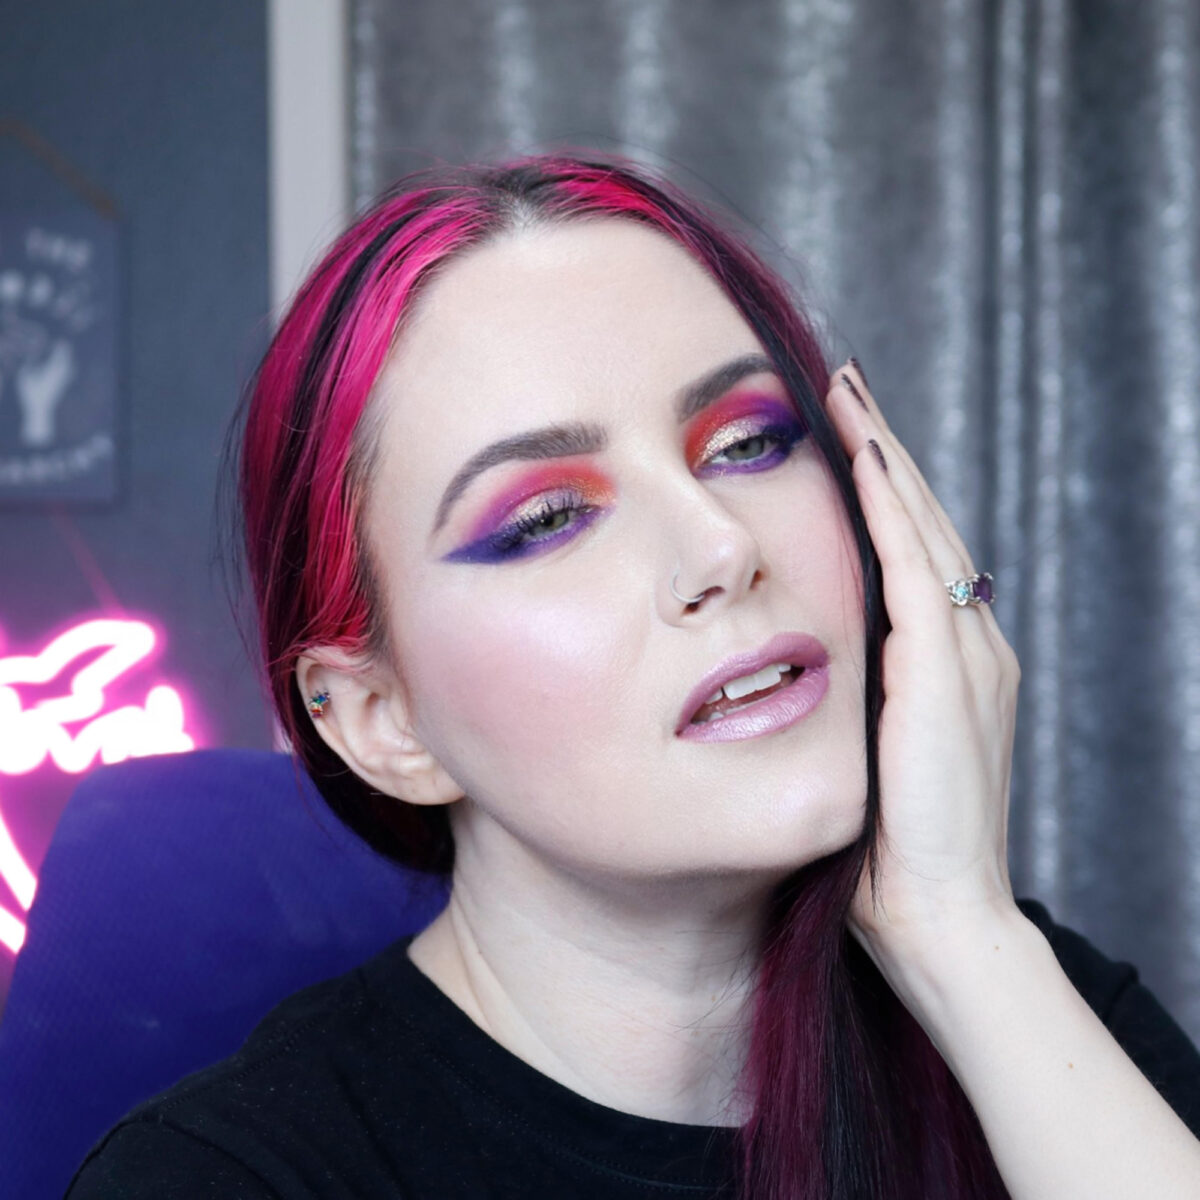 Bright and bold vegan makeup inspiration by Cordelia Frost